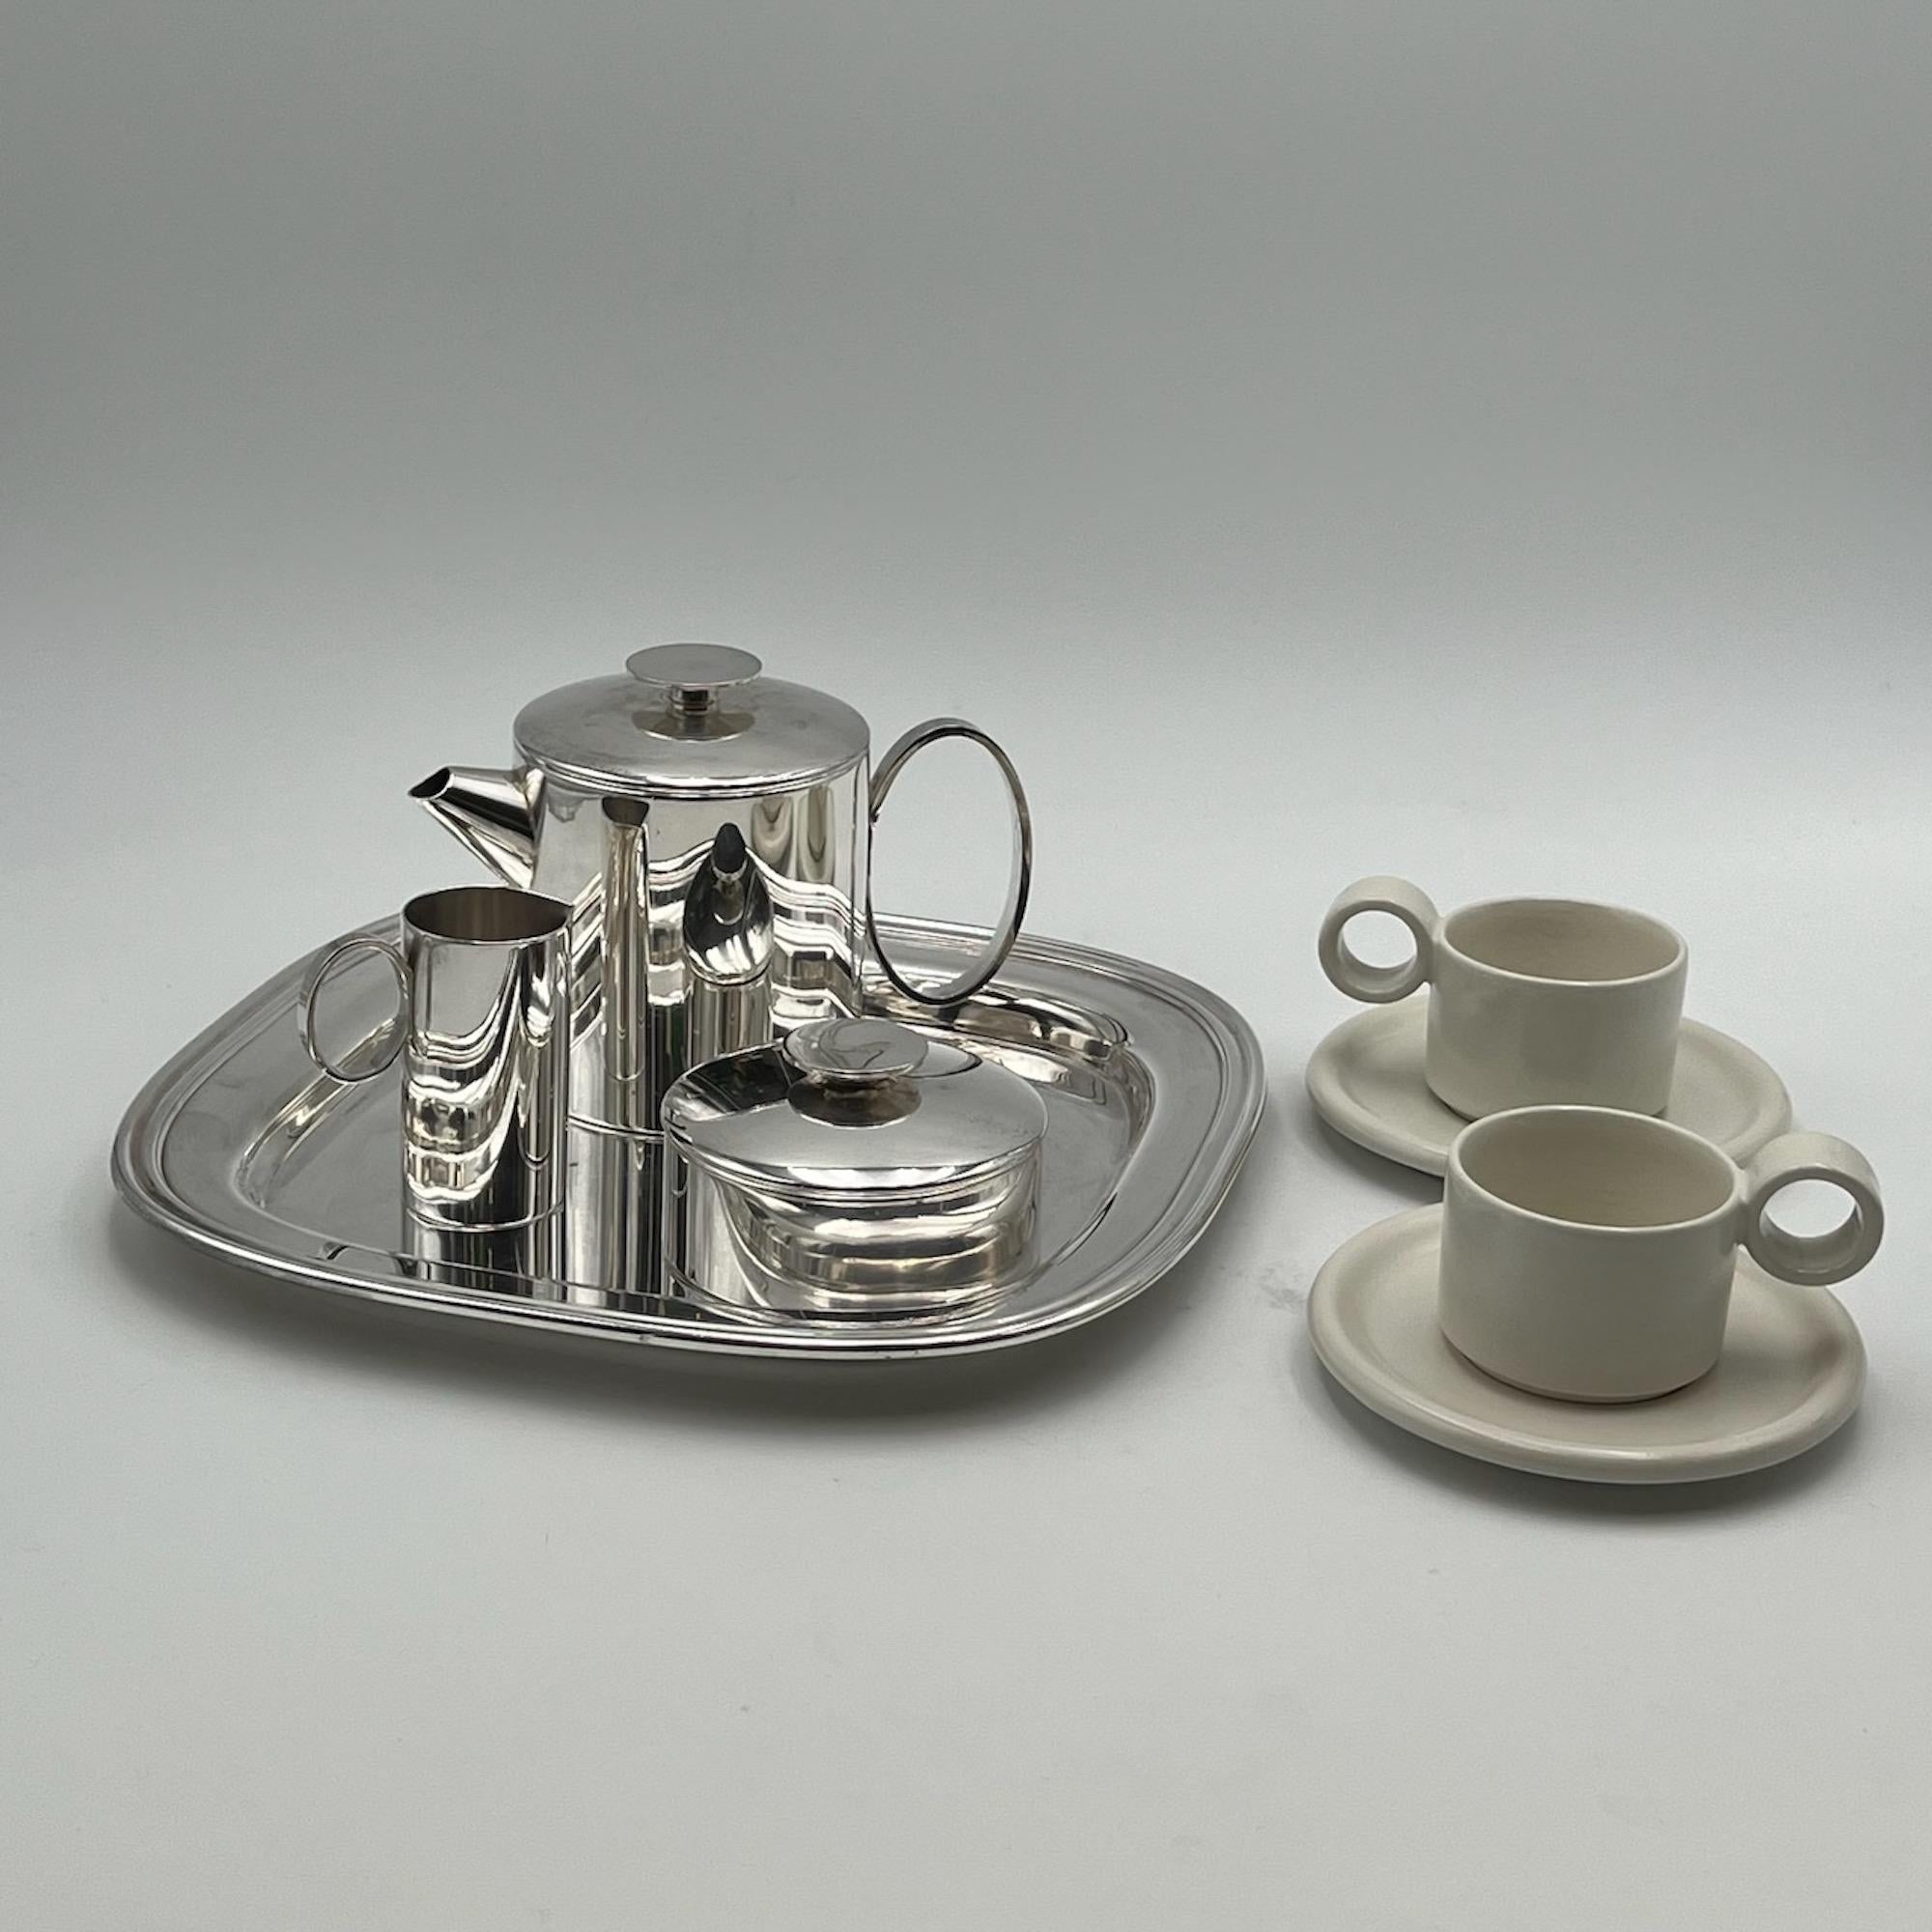 Vintage Tableware Gallia Collection by Sabattini for Christofle, 1950s For Sale 1